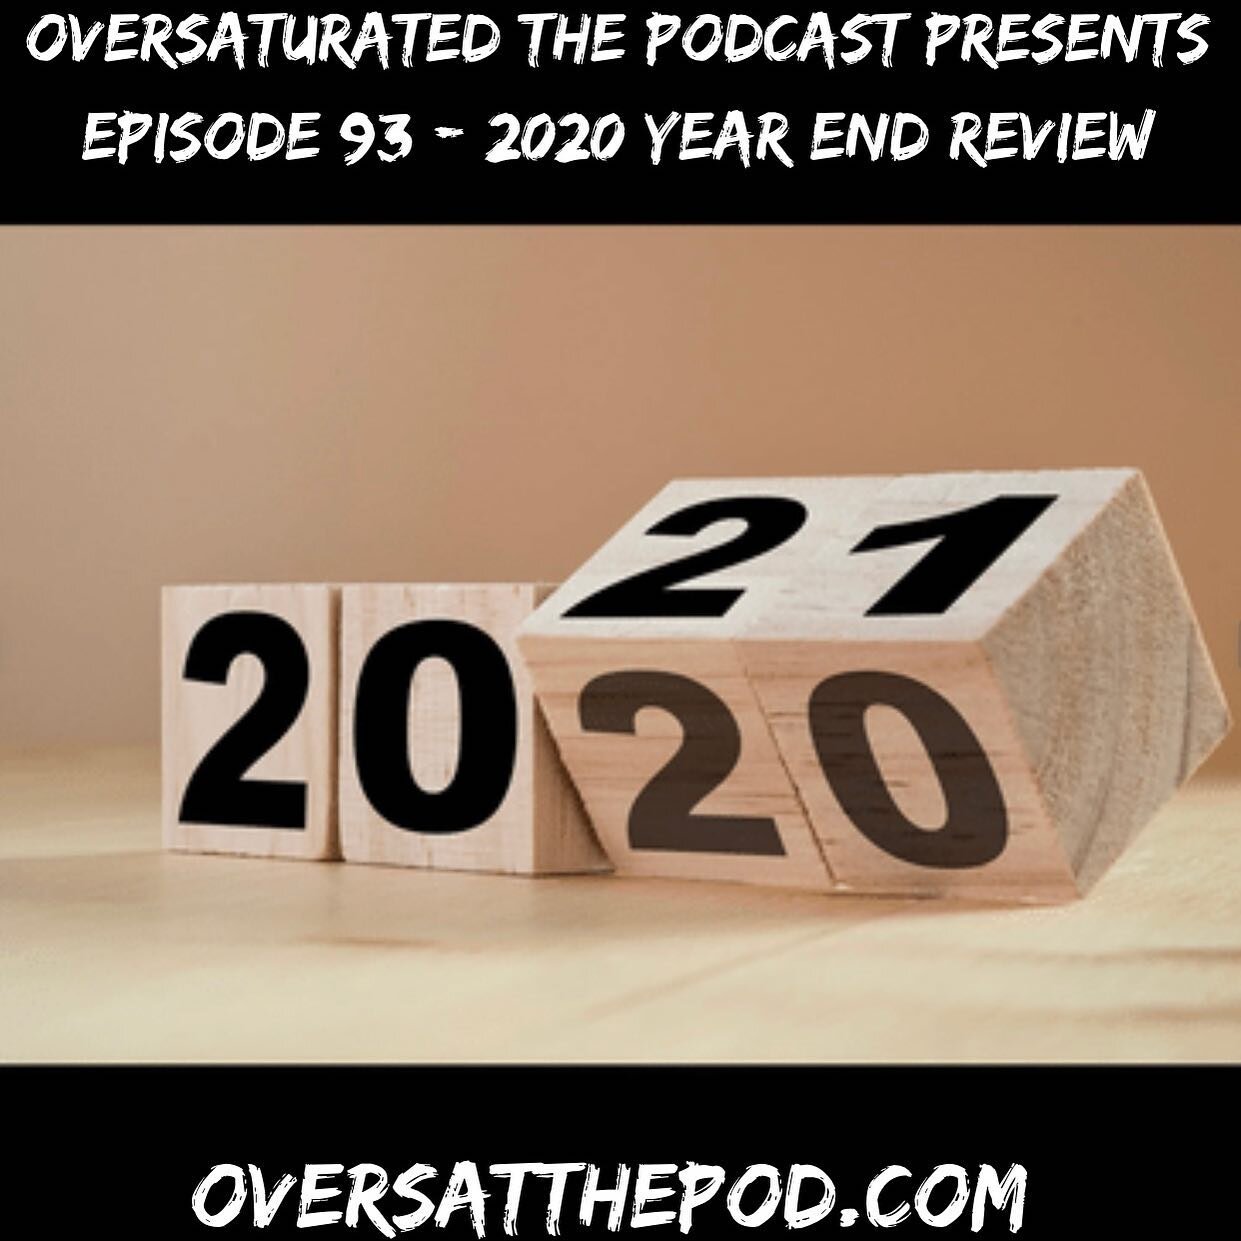 Episode 93 is Now Available, 2020 Year End Review. @jbs_esl_aamu x @themindofralph are back with the last episode of 2020!

Discussion Topics
-Current State of Politics 
-BLM Protests
-Personal Adjustments
-Favorite OS Moments
-Lack of Movies
-Top 5 